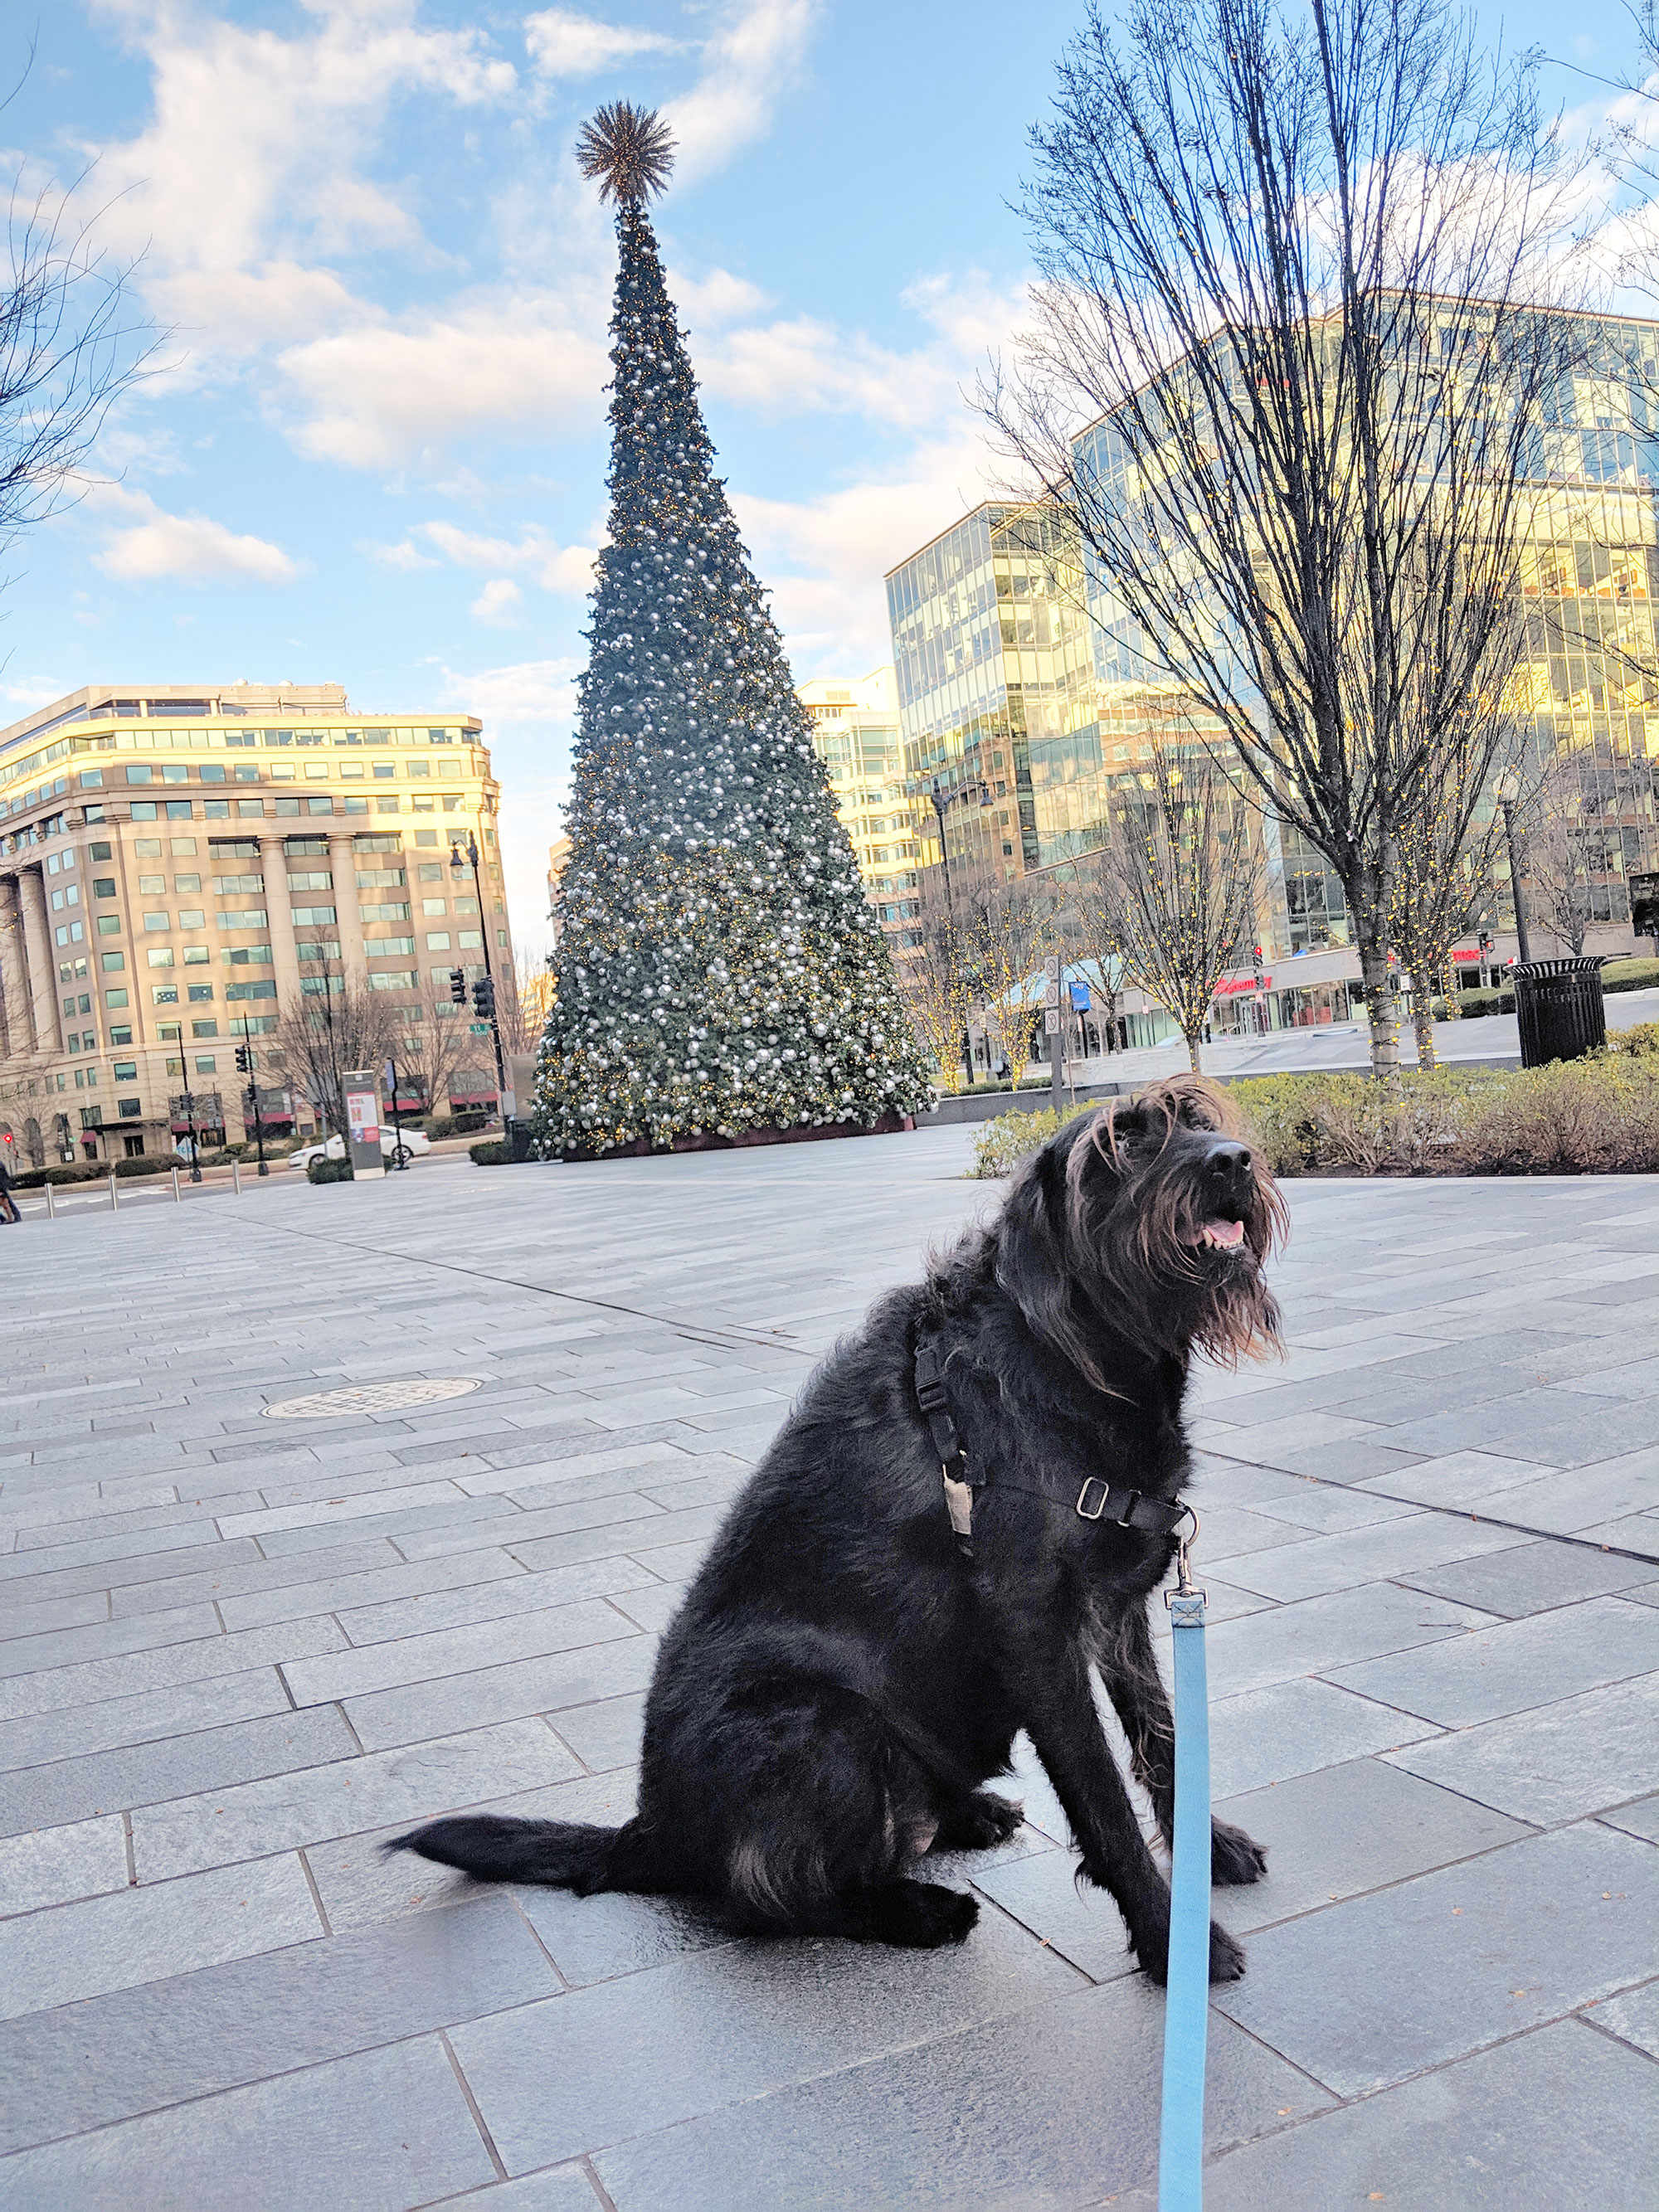 Ingrid posing in front of a Christmas tree near CityCenter D.C.